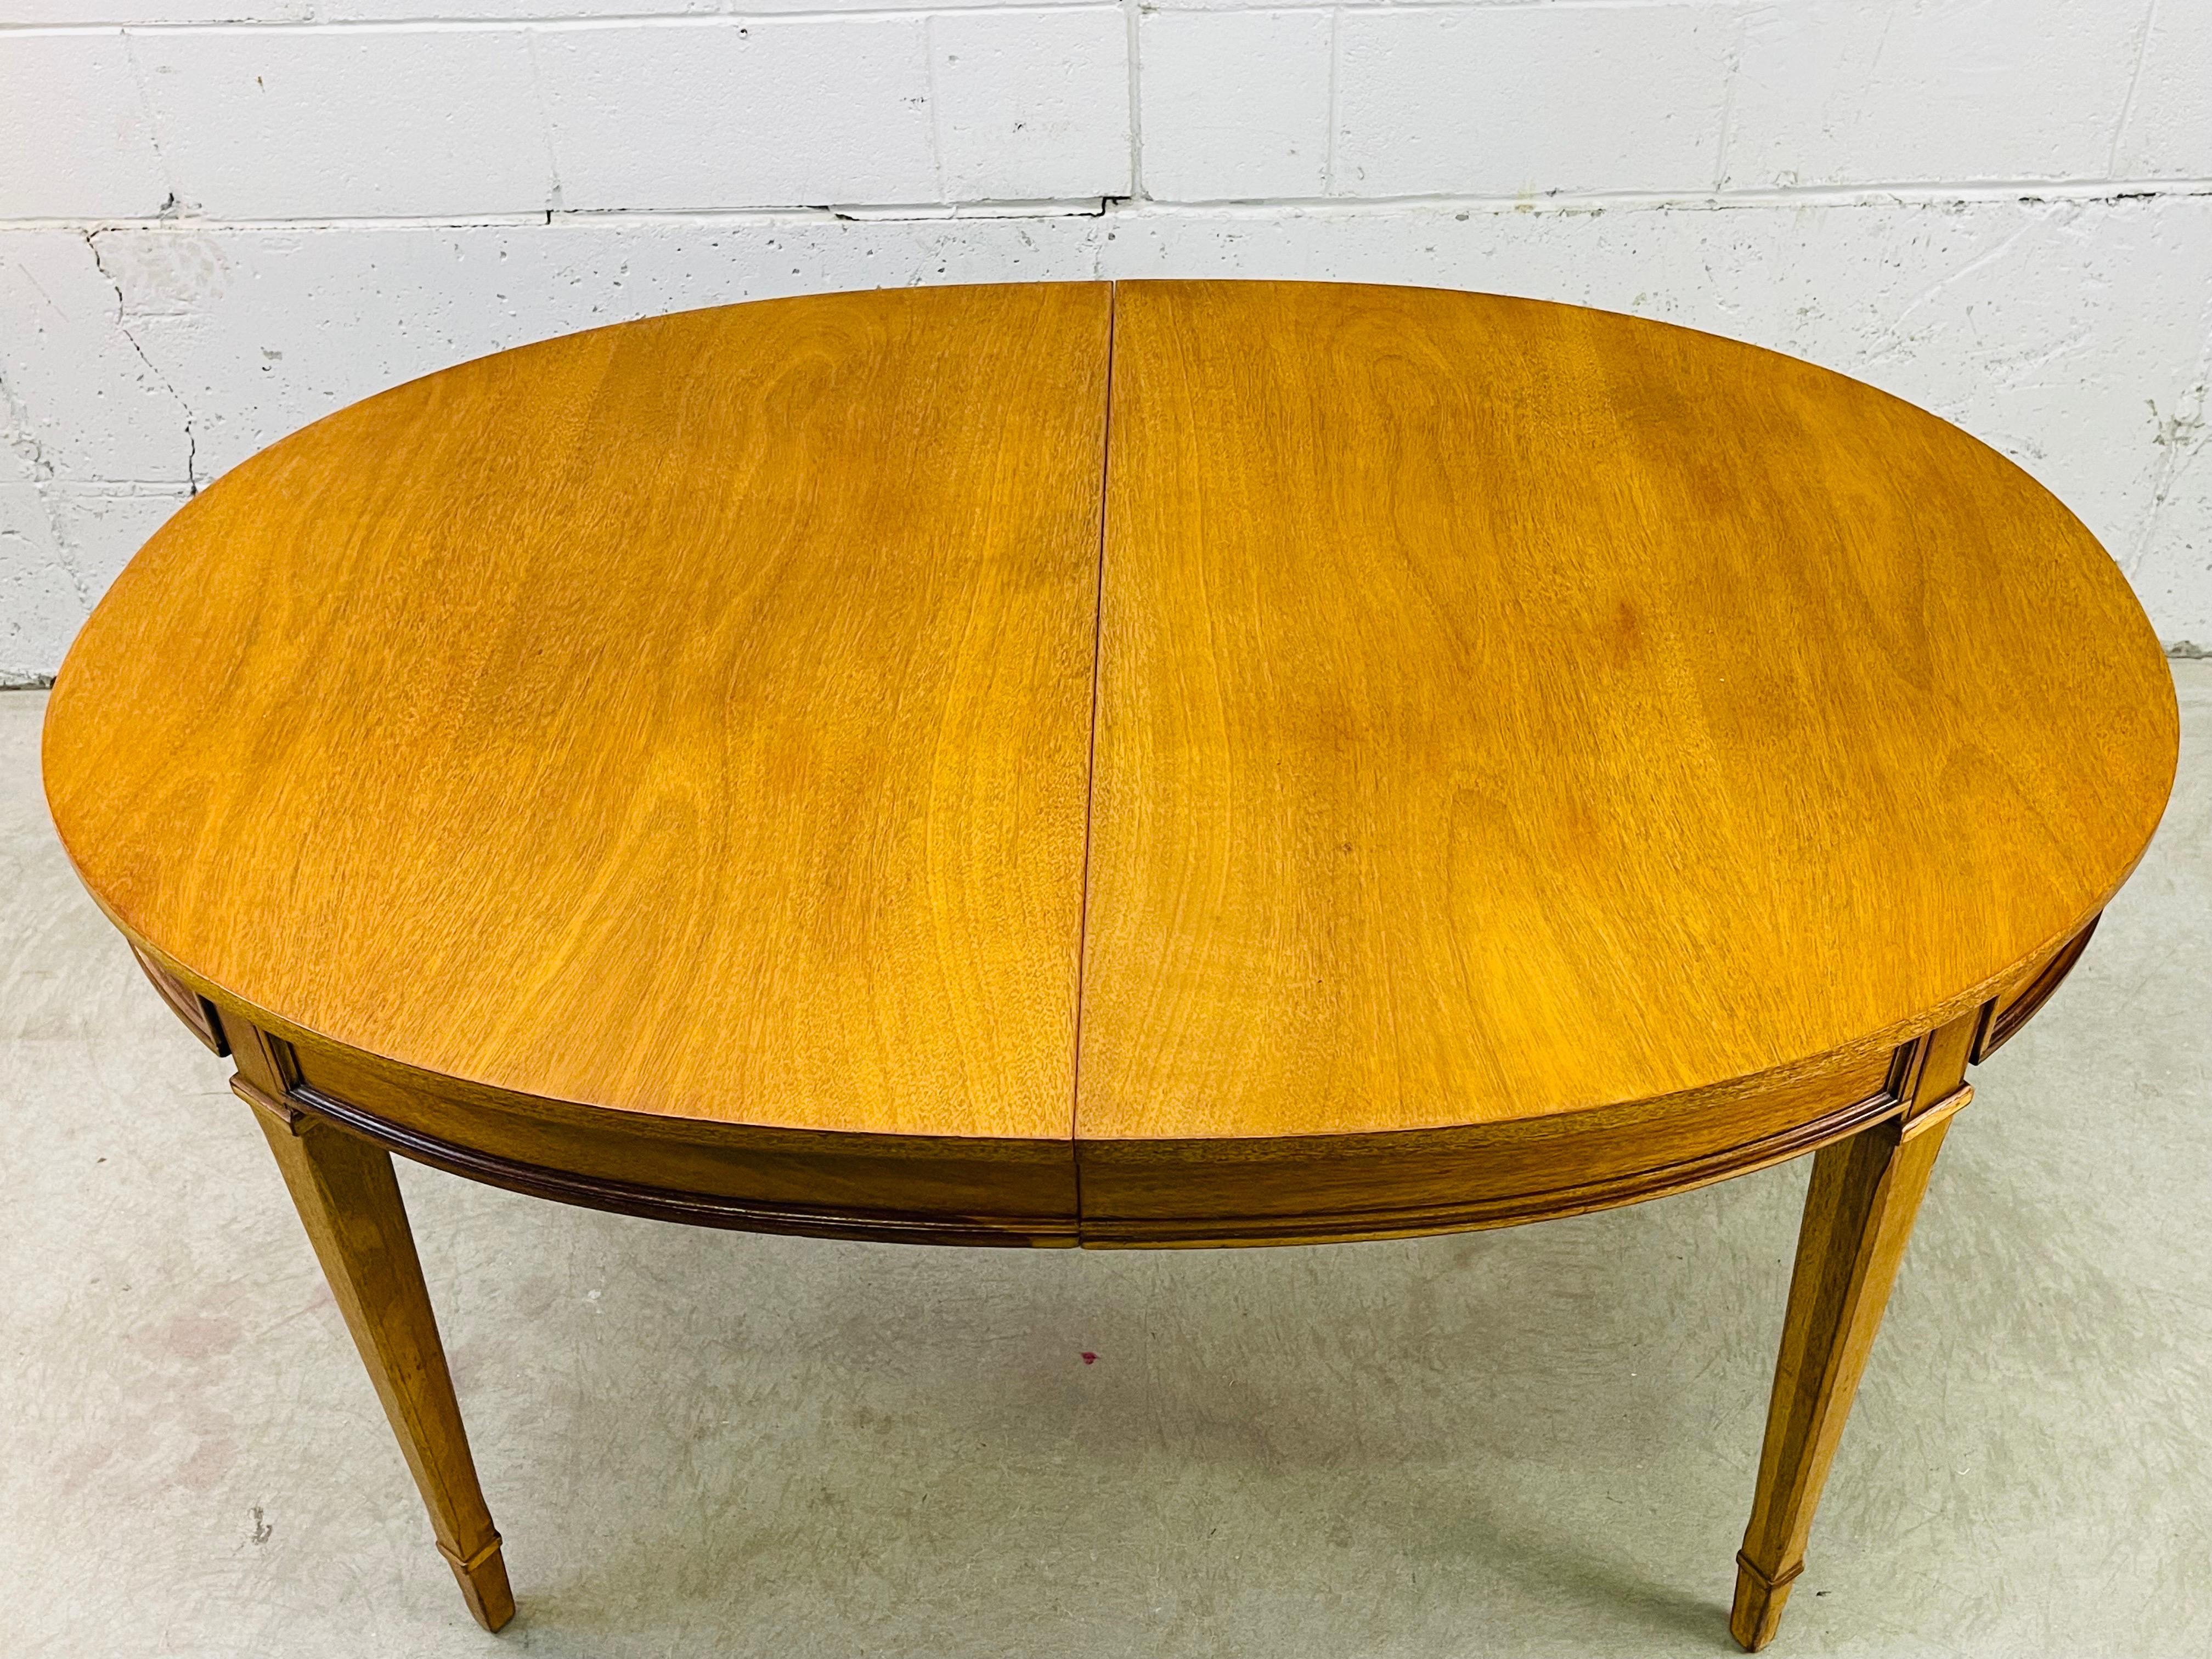 Vintage 1960s Drexel Furniture oval mahogany wood dining room table from the Triune collection. This table comes with two additional boards, each 12”W. The table fully open with both boards is 80”W. The table has beautiful mahogany wood grain. Knee